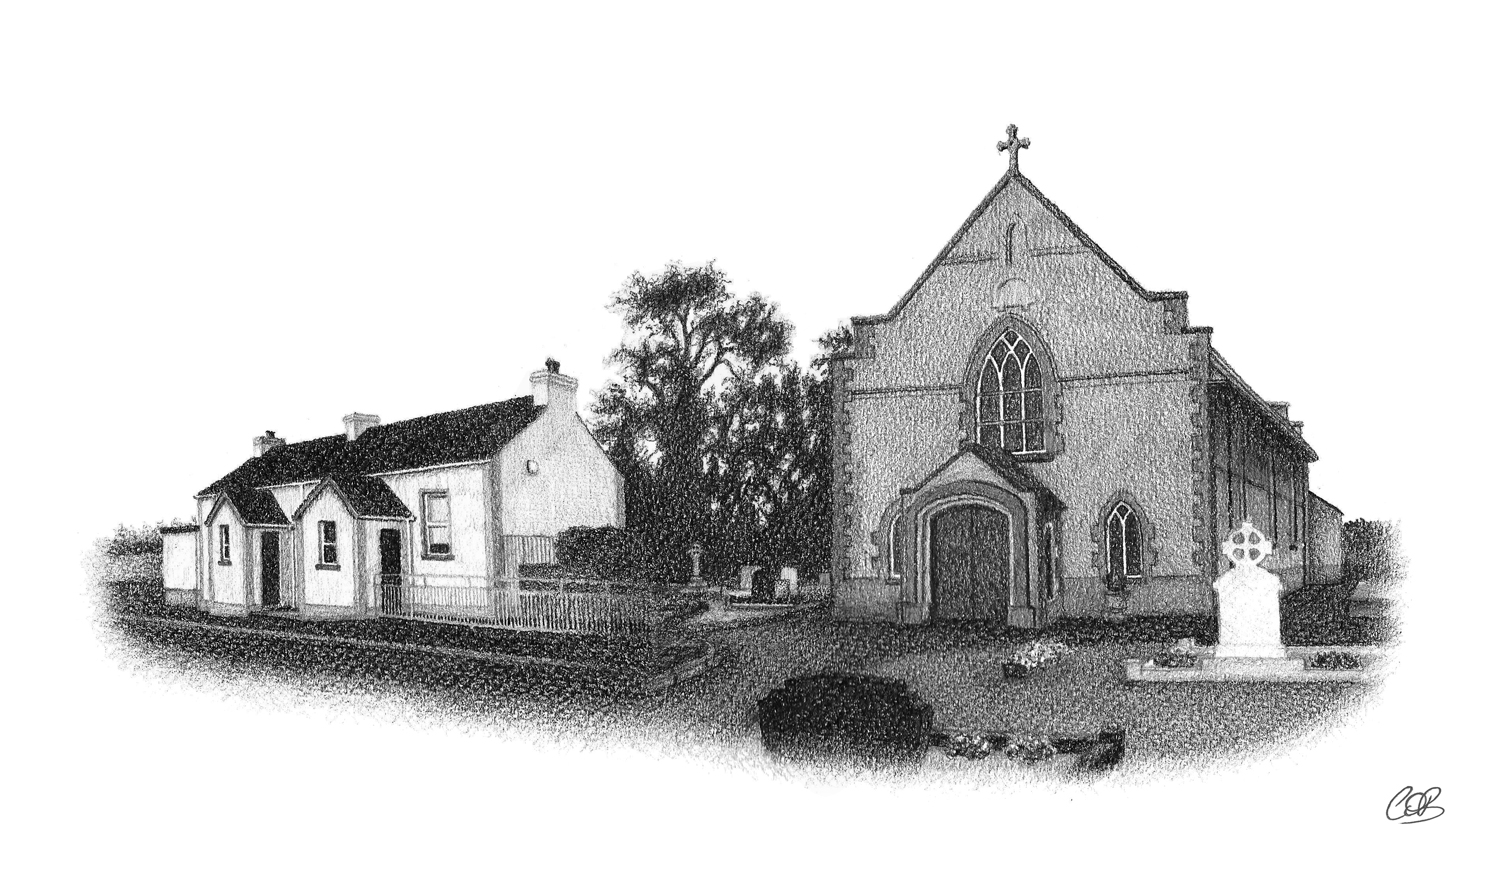 St. John's School and Chapel - Annaghmore